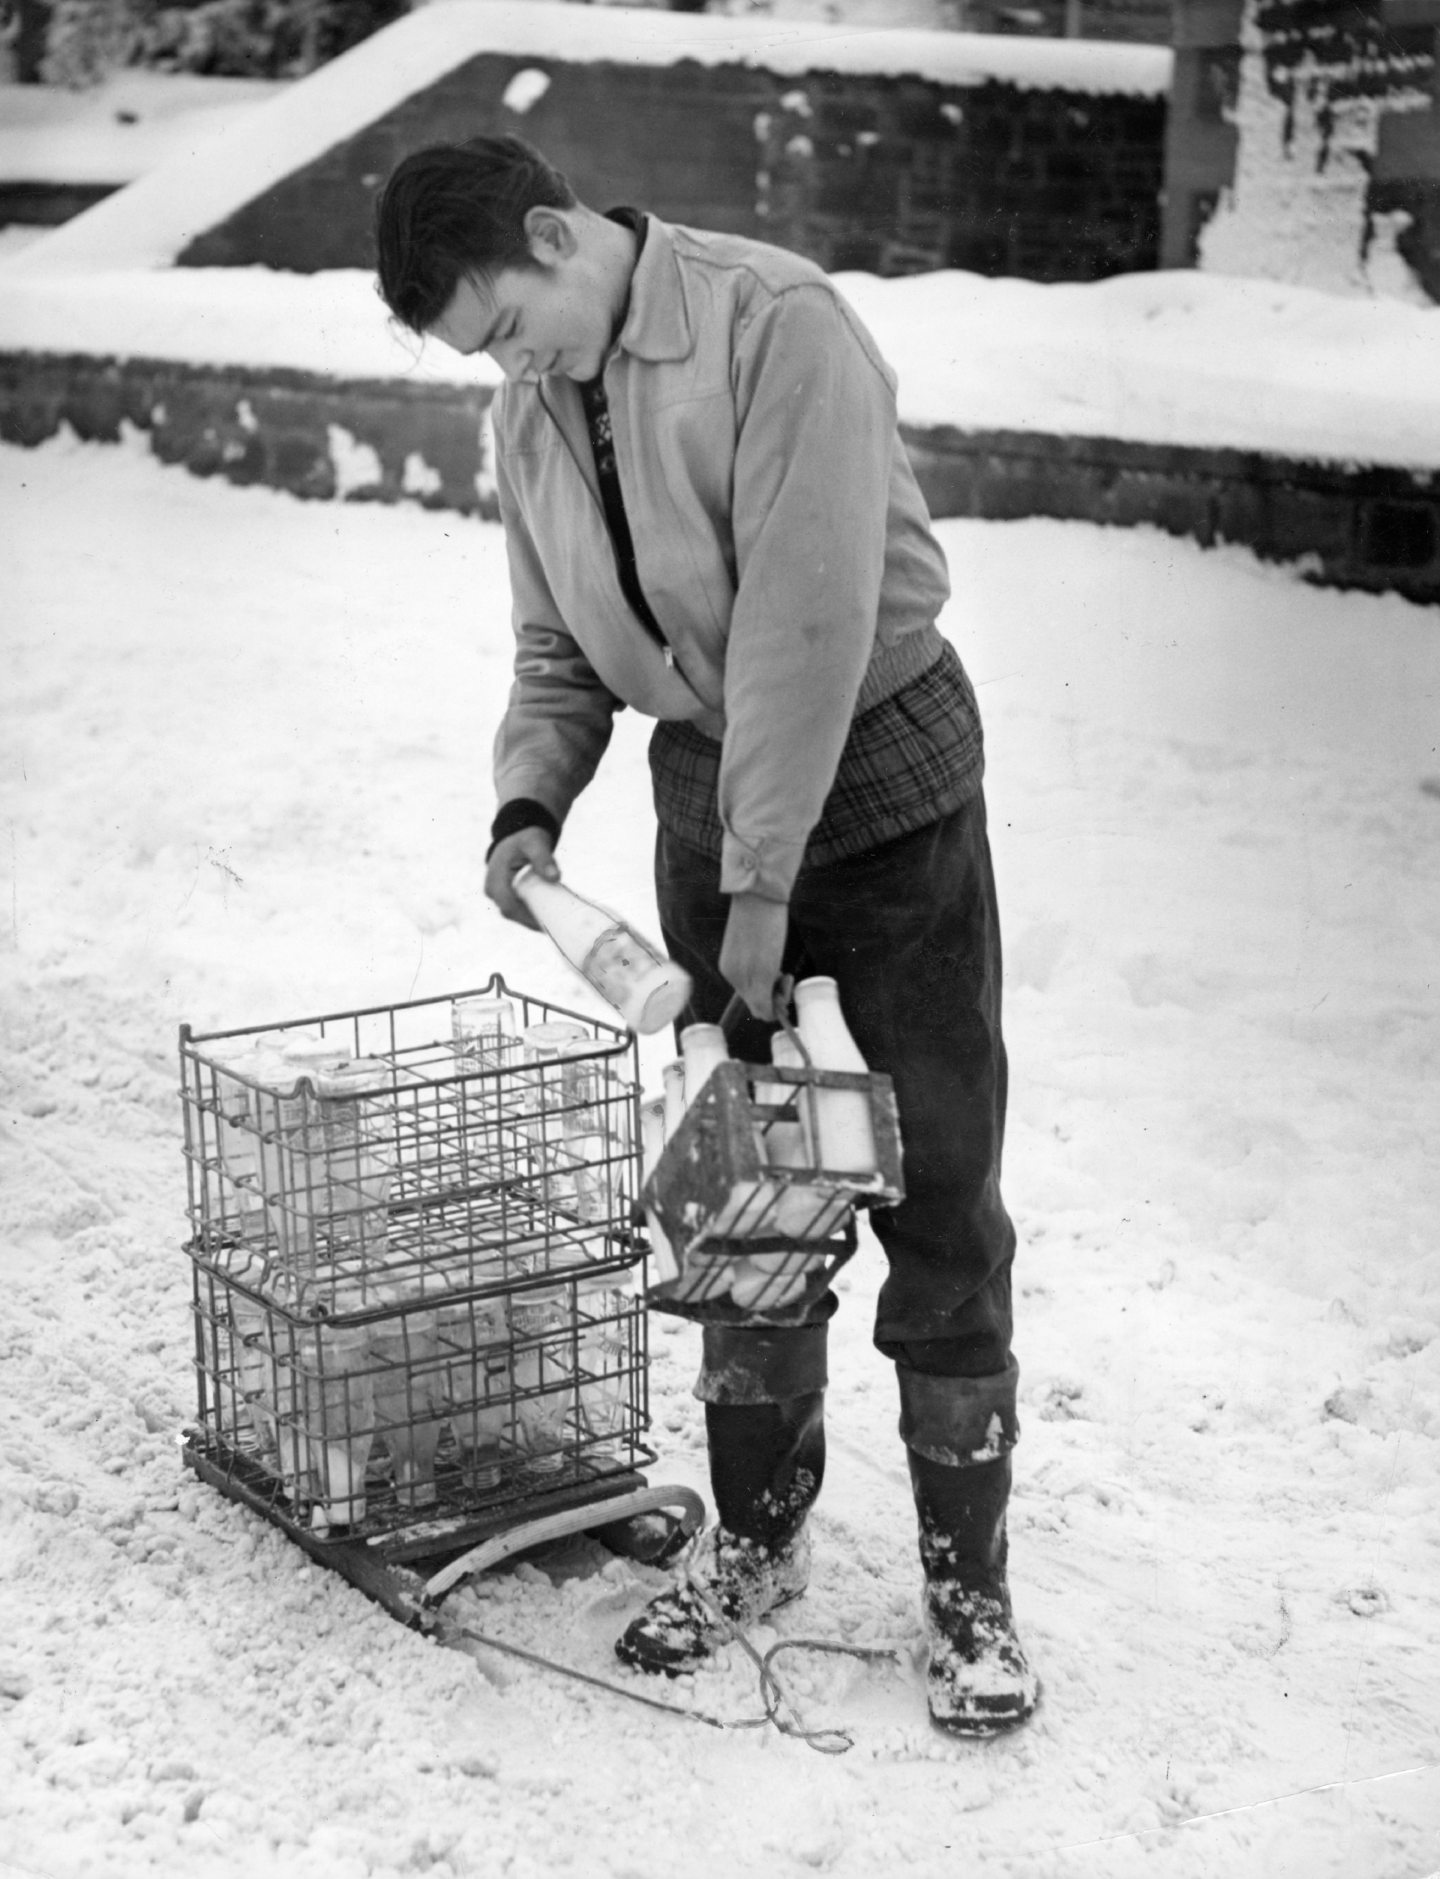 William Buchan delivering milk in the snow in the lochee area of dundee